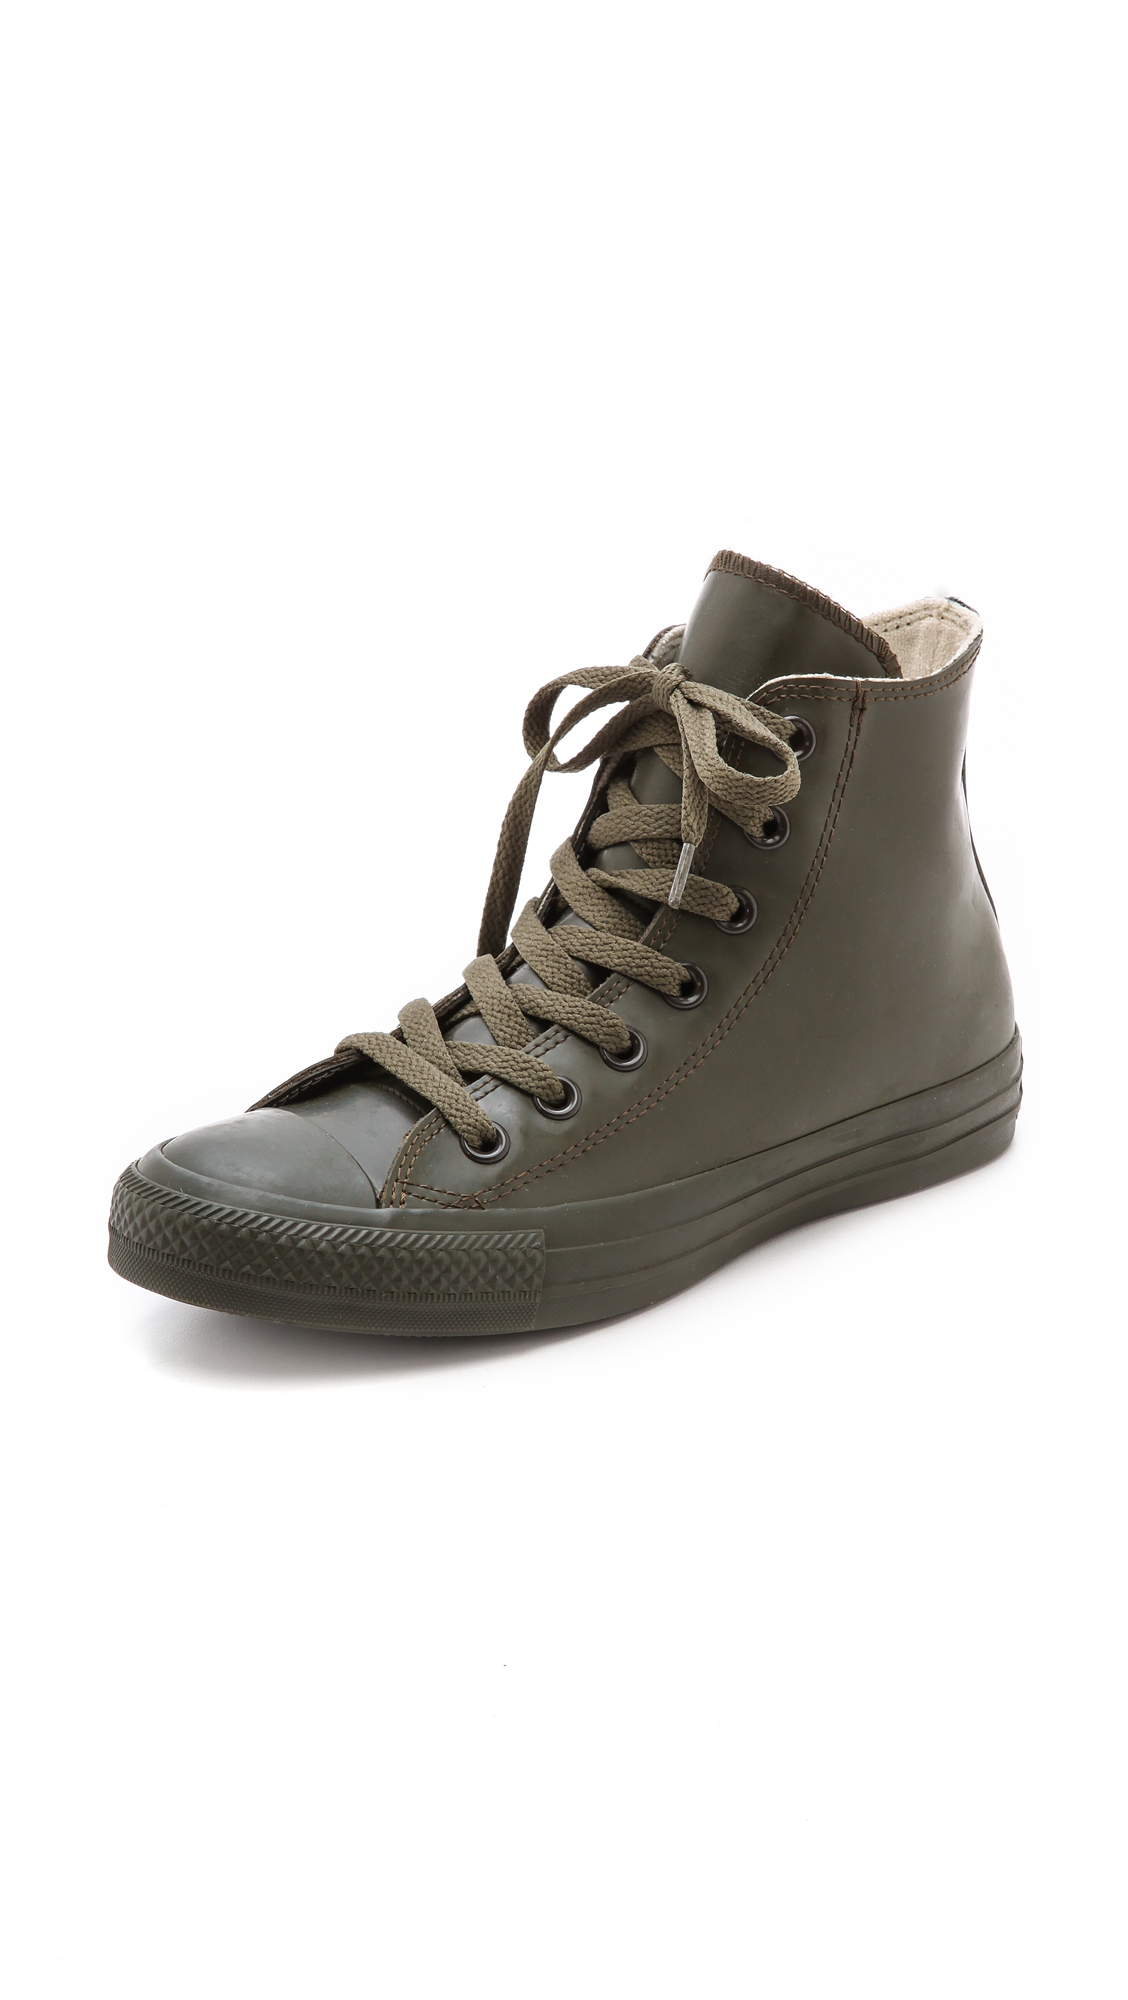 Converse Rubber Coated Chuck Taylor Sneakers - Pineneedle in Green | Lyst